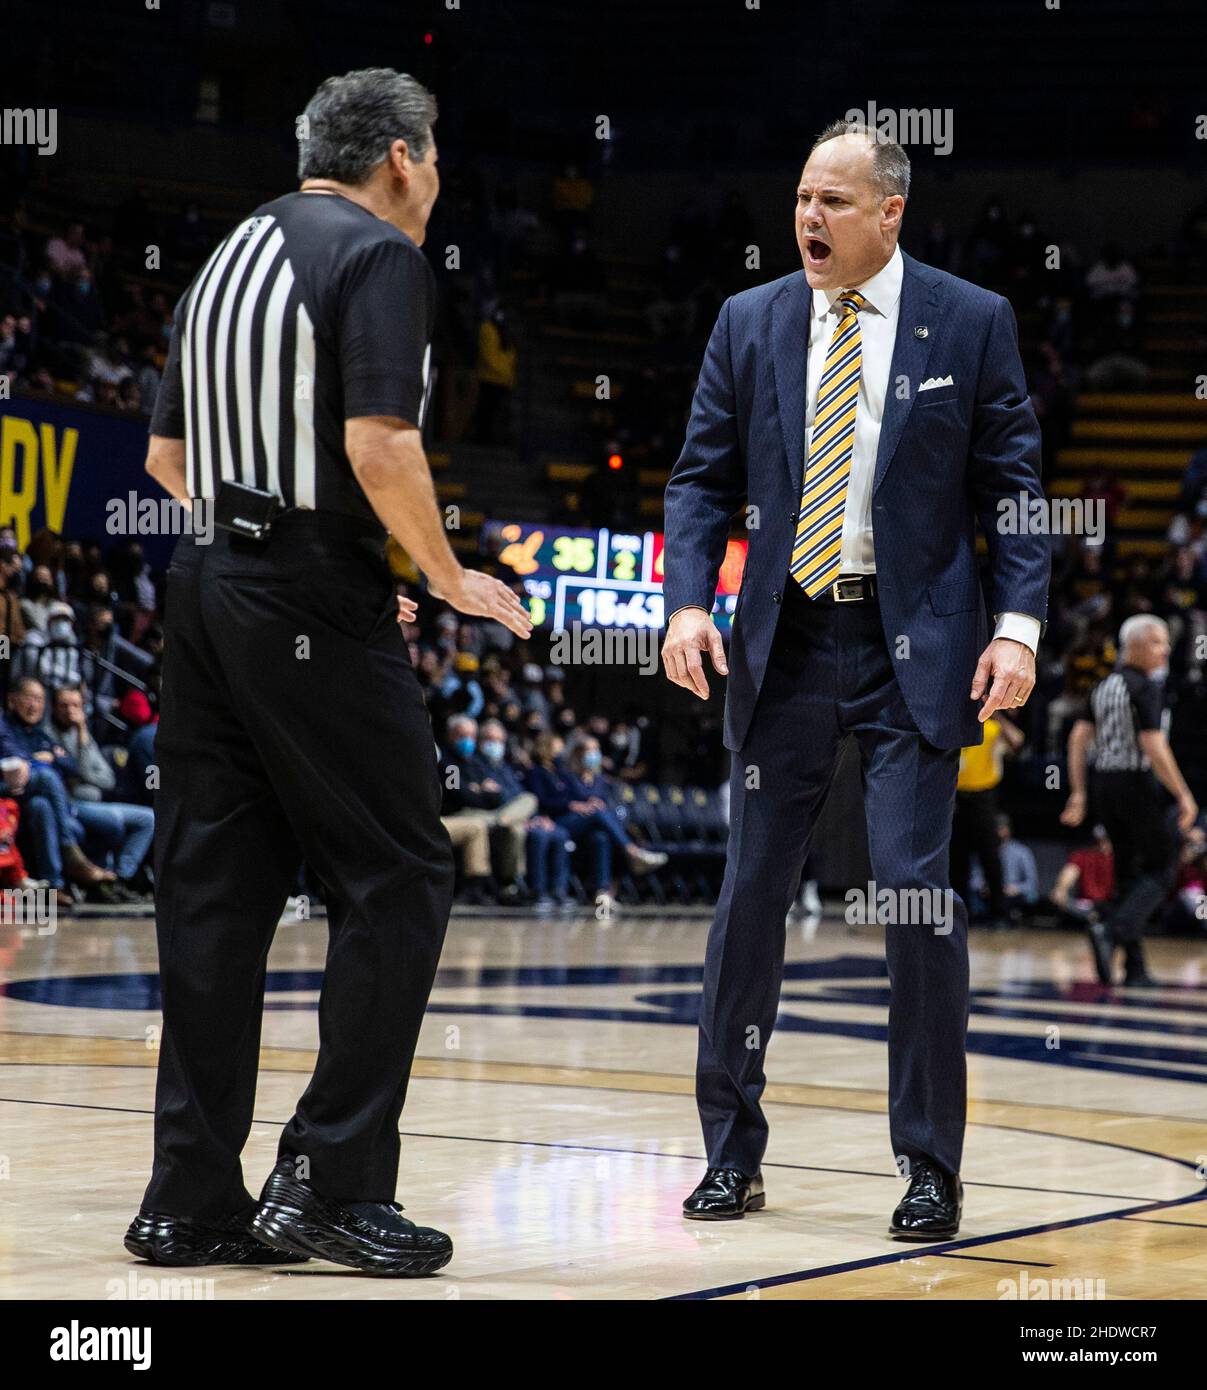 Hass Pavilion. 06th Jan, 2022. CA U.S.A. California head coach Mark Fox upset over the referee call during the NCAA MenÕs Basketball game between USC Trojans and the California Golden Bears. USC won 77-63 at Hass Pavilion. Thurman James/CSM/Alamy Live News Stock Photo